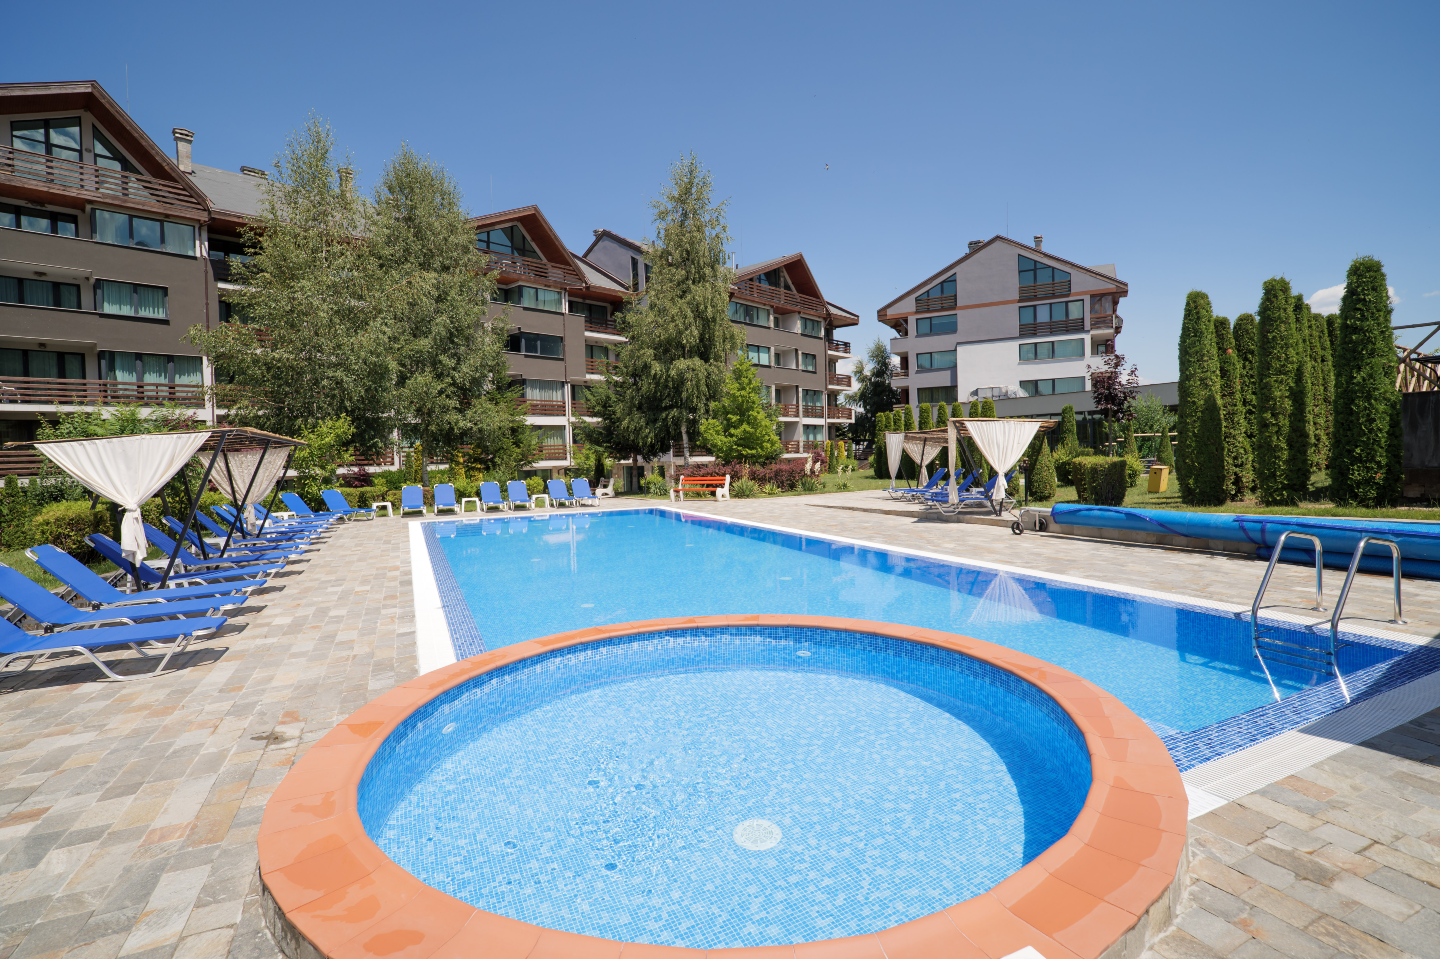 The outdoor heated pool with mineral water